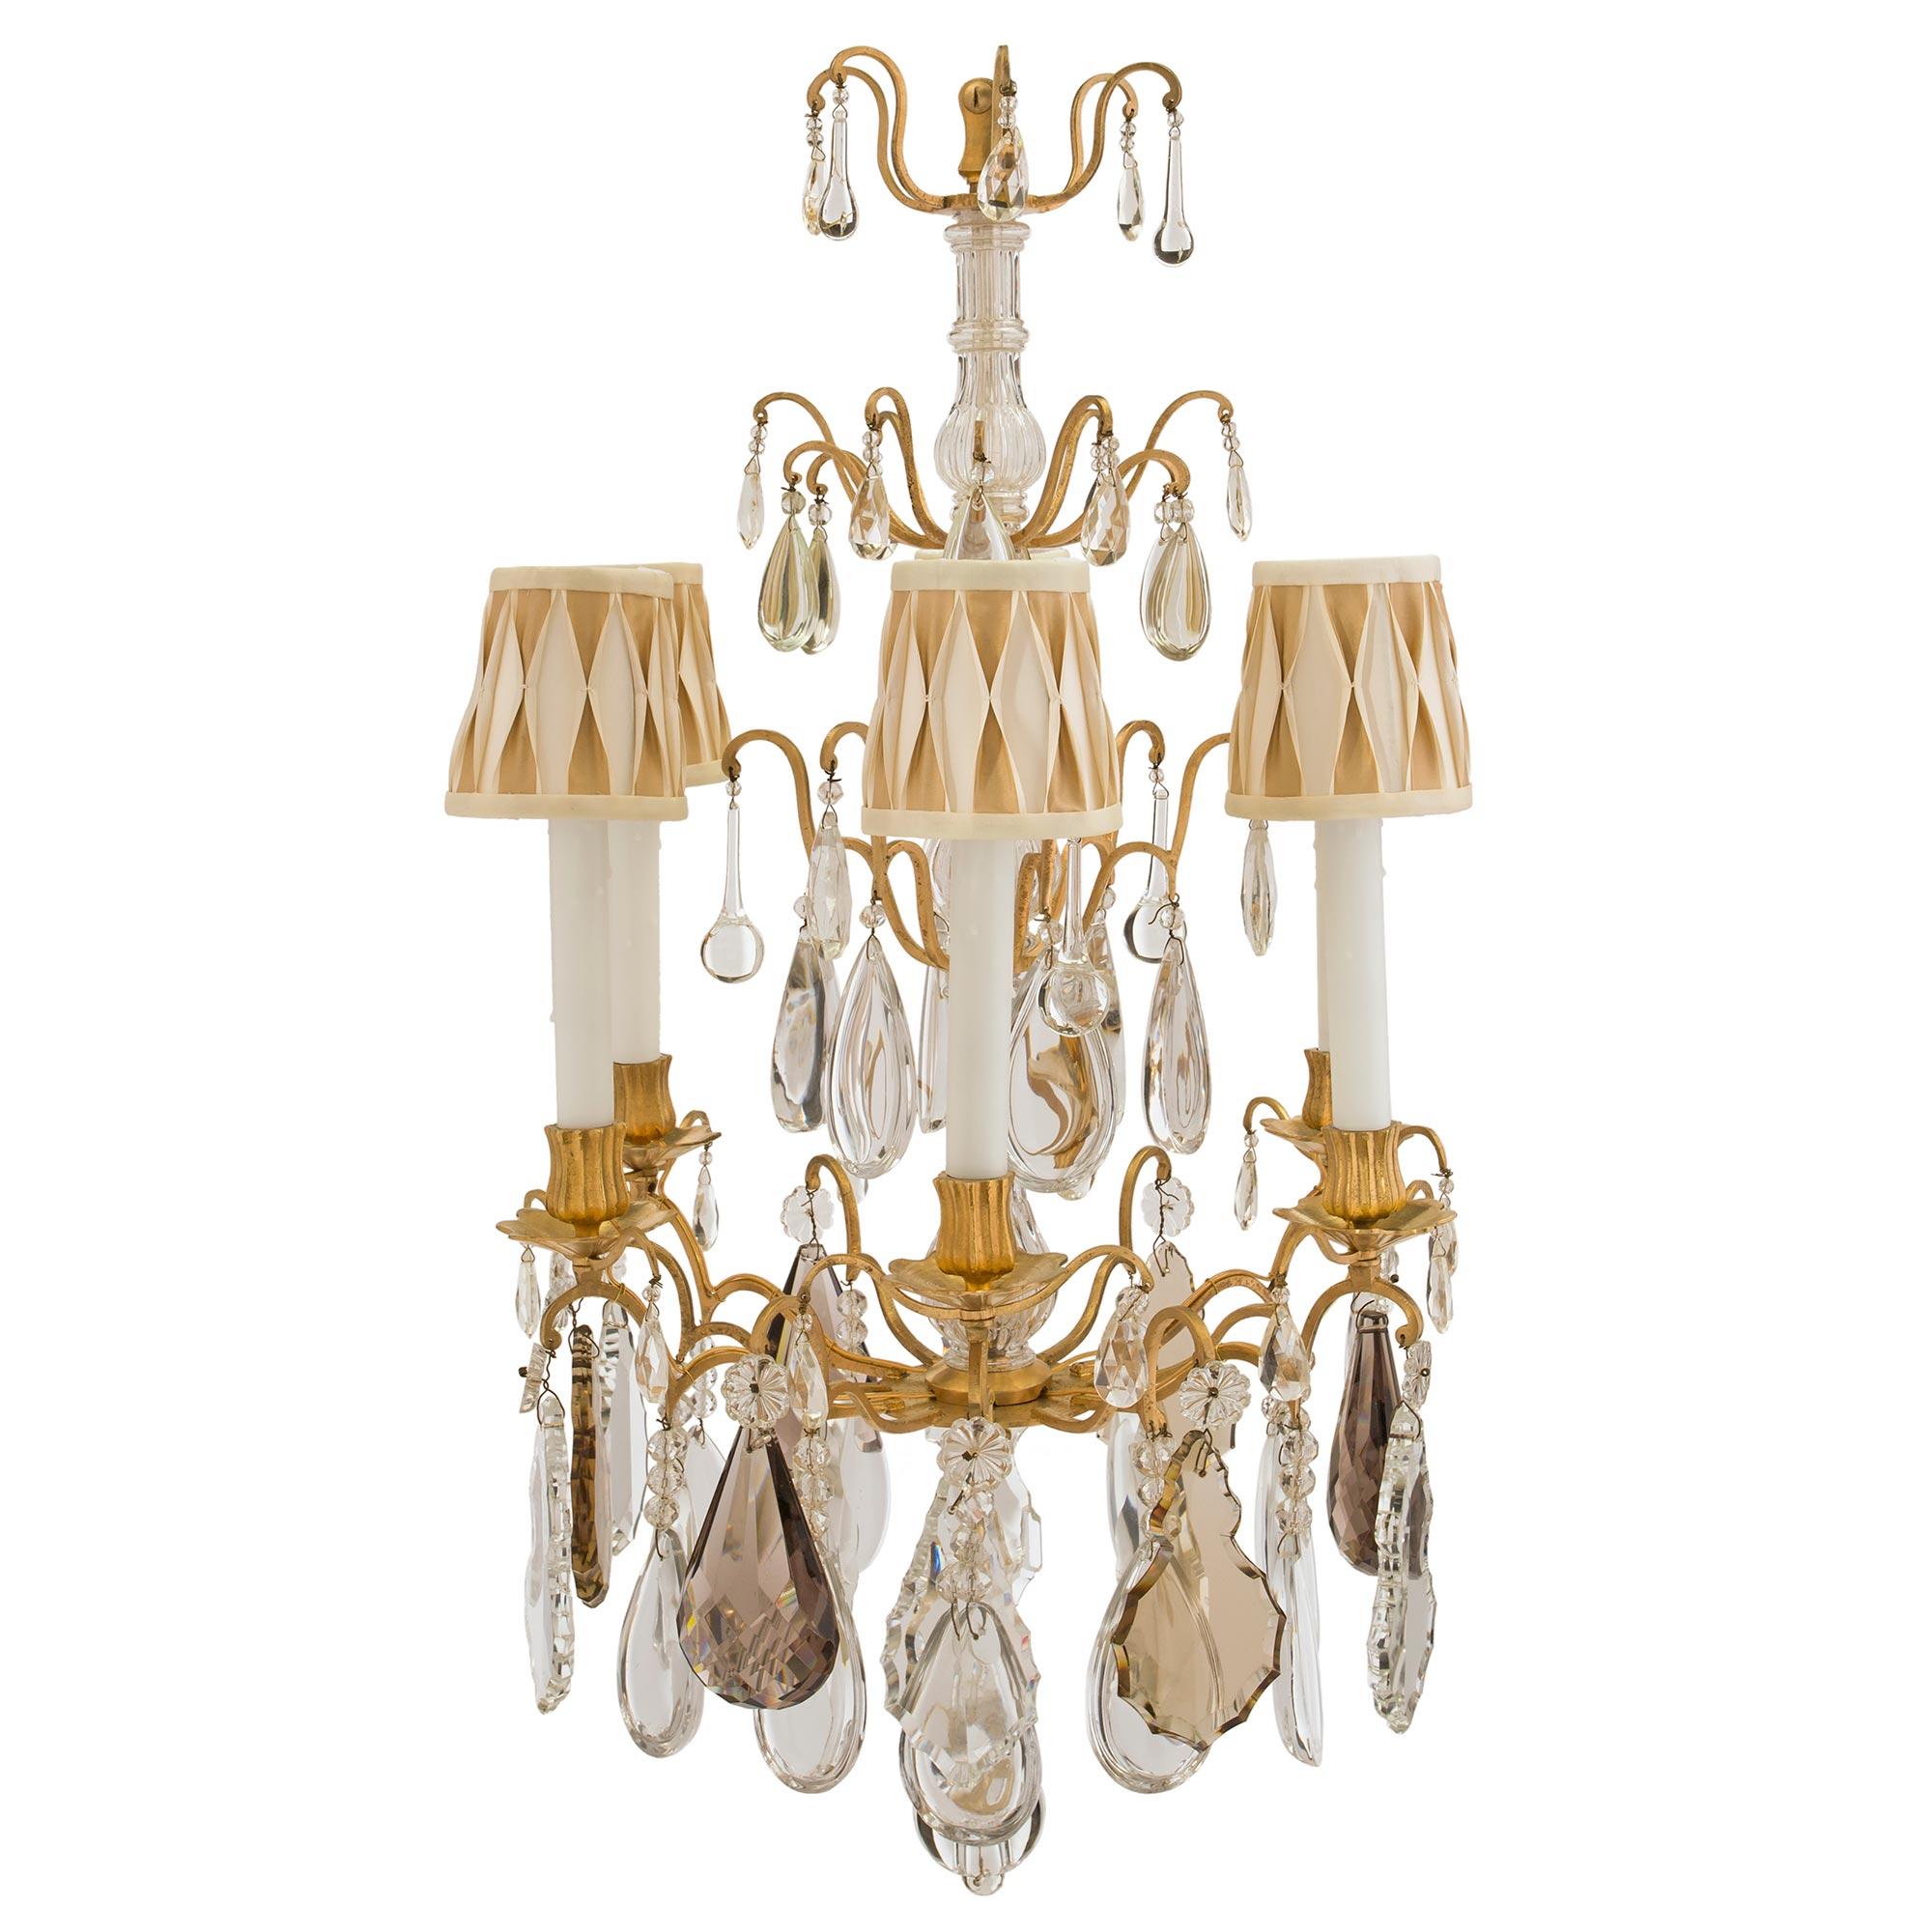 A most elegant French mid 19th century Louis XV st. Baccarat crystal and ormolu six arm chandelier. The chandelier has an open cage with a reeded crystal central fut. A the bottom are the six electrified scrolled arms. Each are heavily adorned by